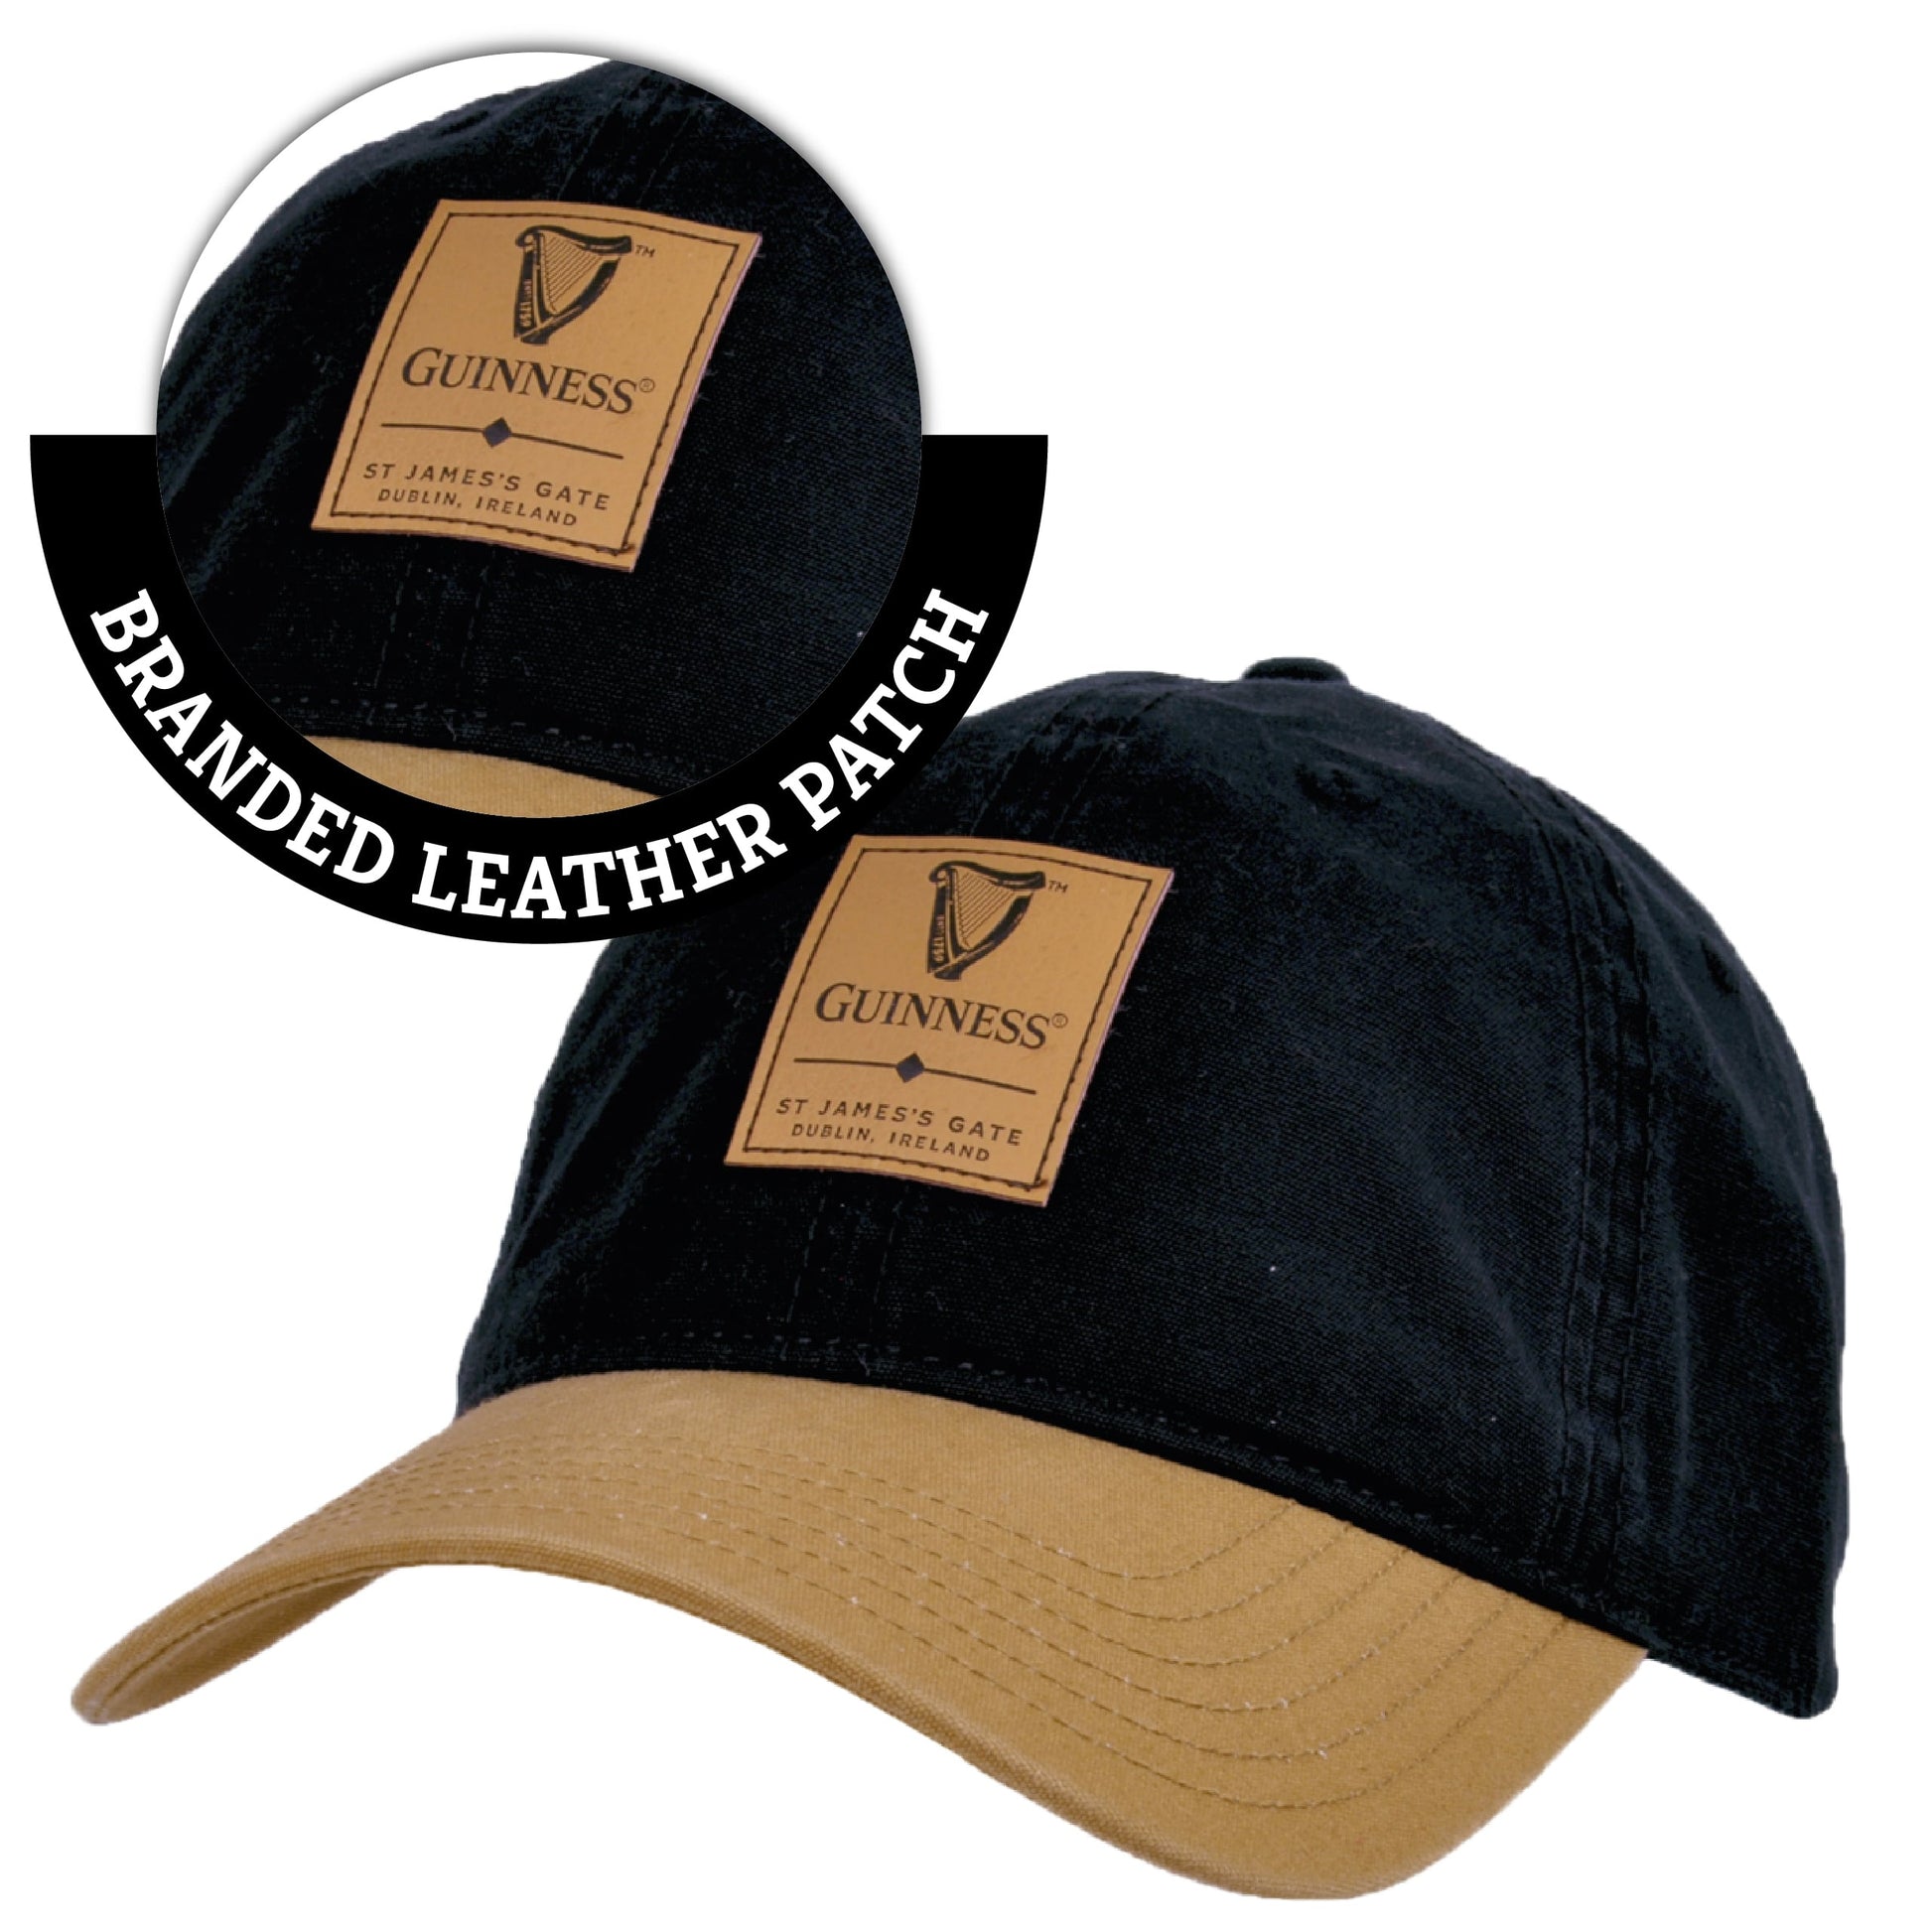 Guinness Premium Black & Camel with Leather Patch Cap